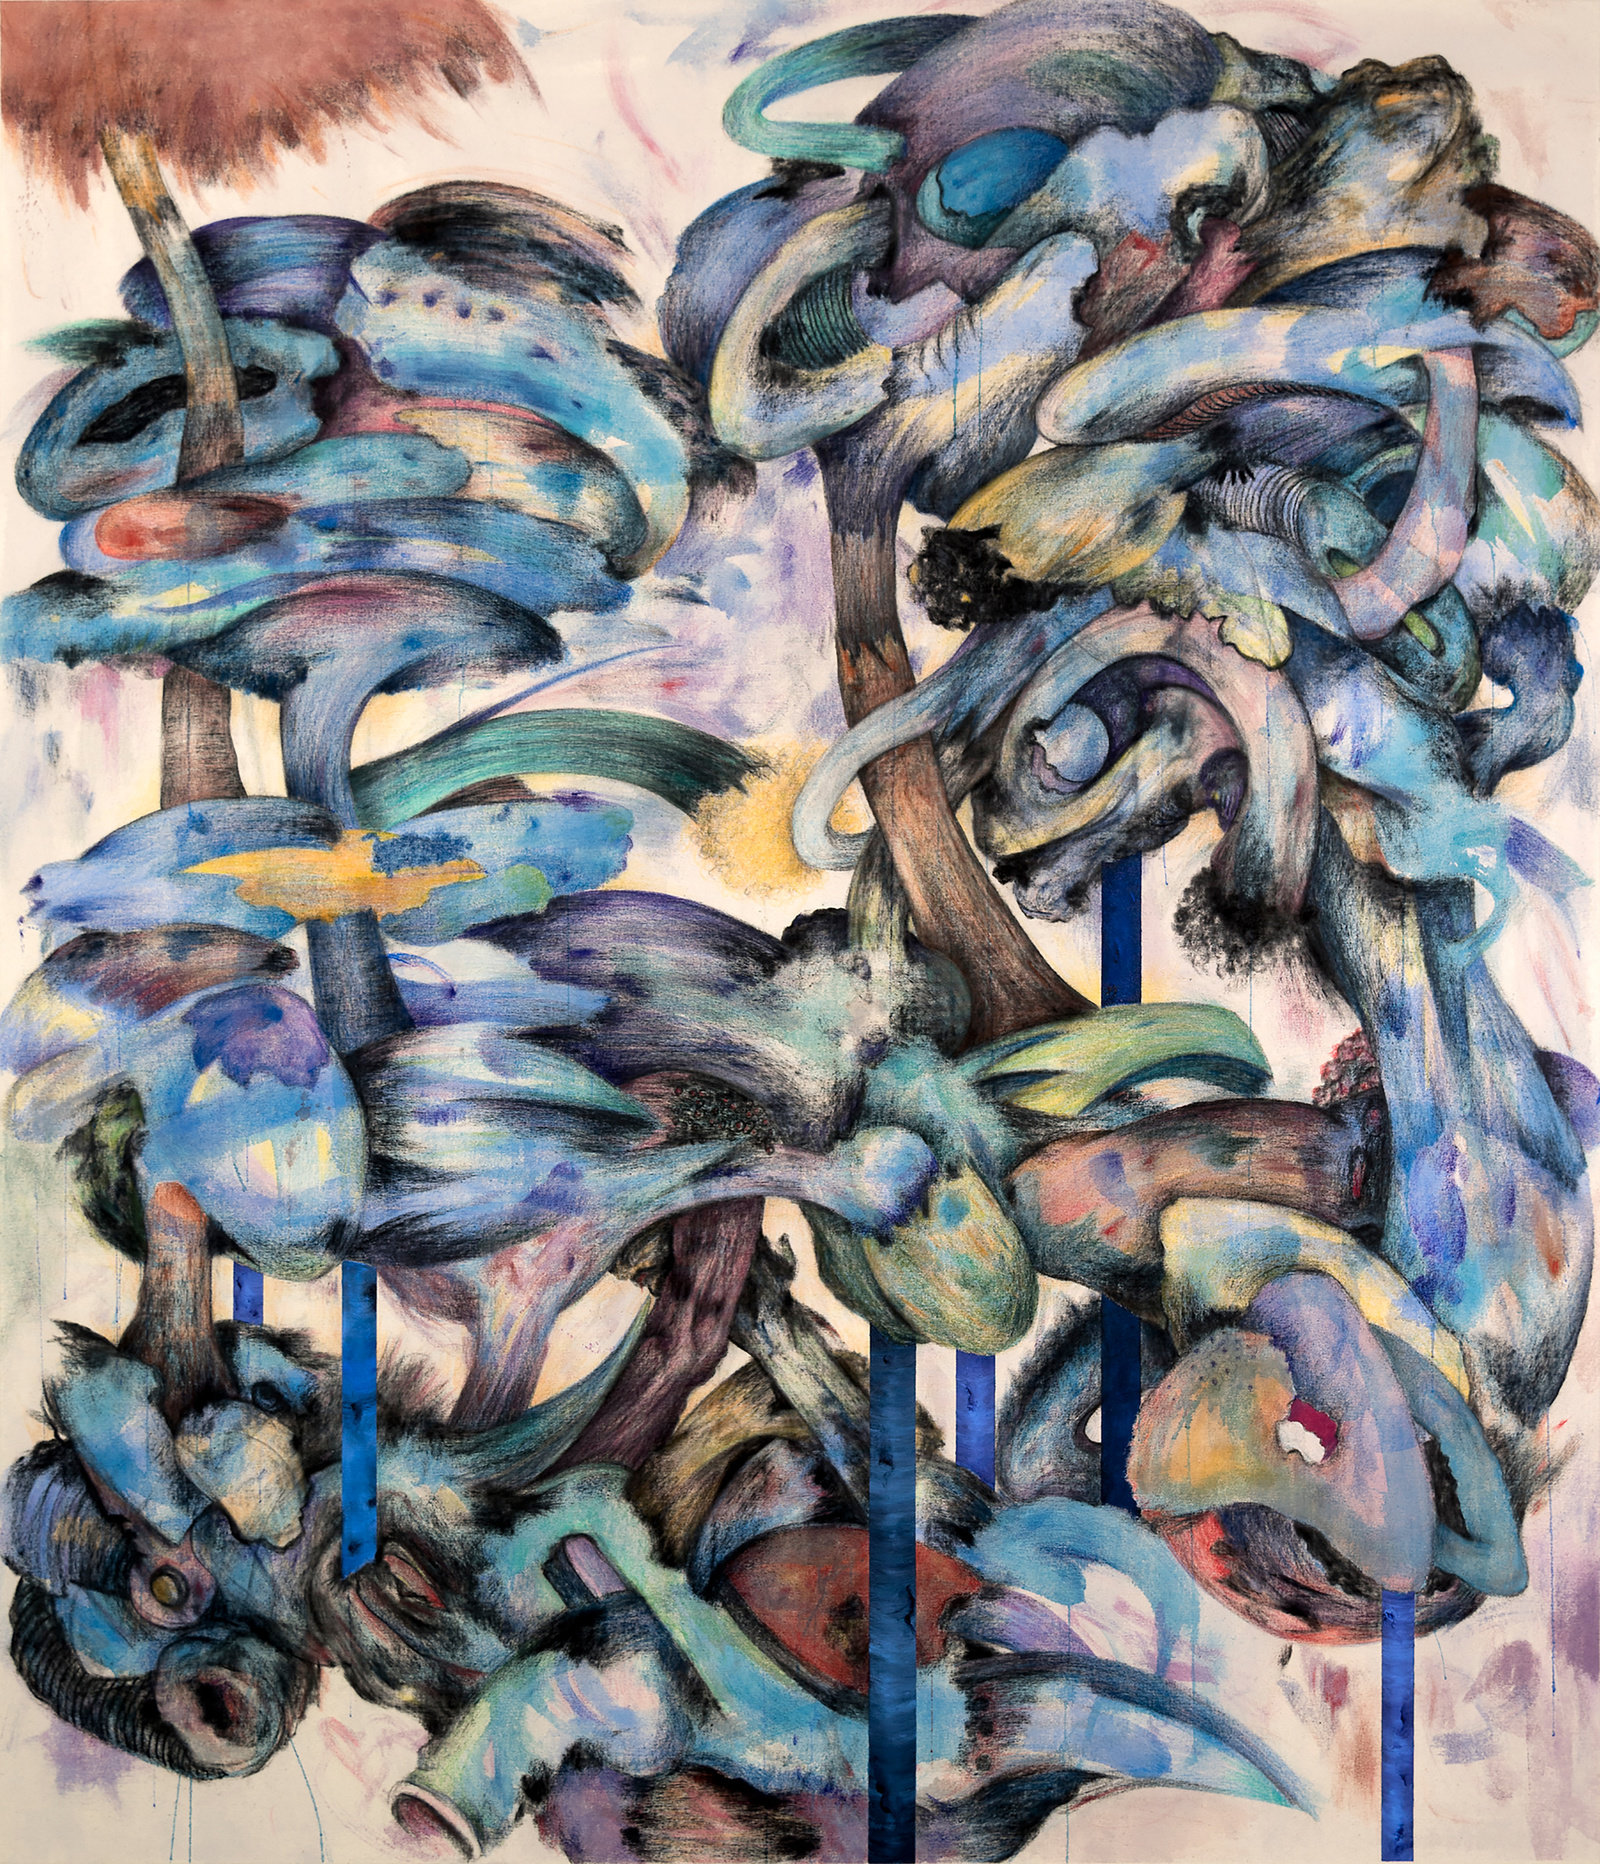 Alsoudani, midnight blue, 2018, acrylic, charcoal, colored pencil on canvas, 76 x 64 in., 193 x 162.6 cm, cnon 60.499